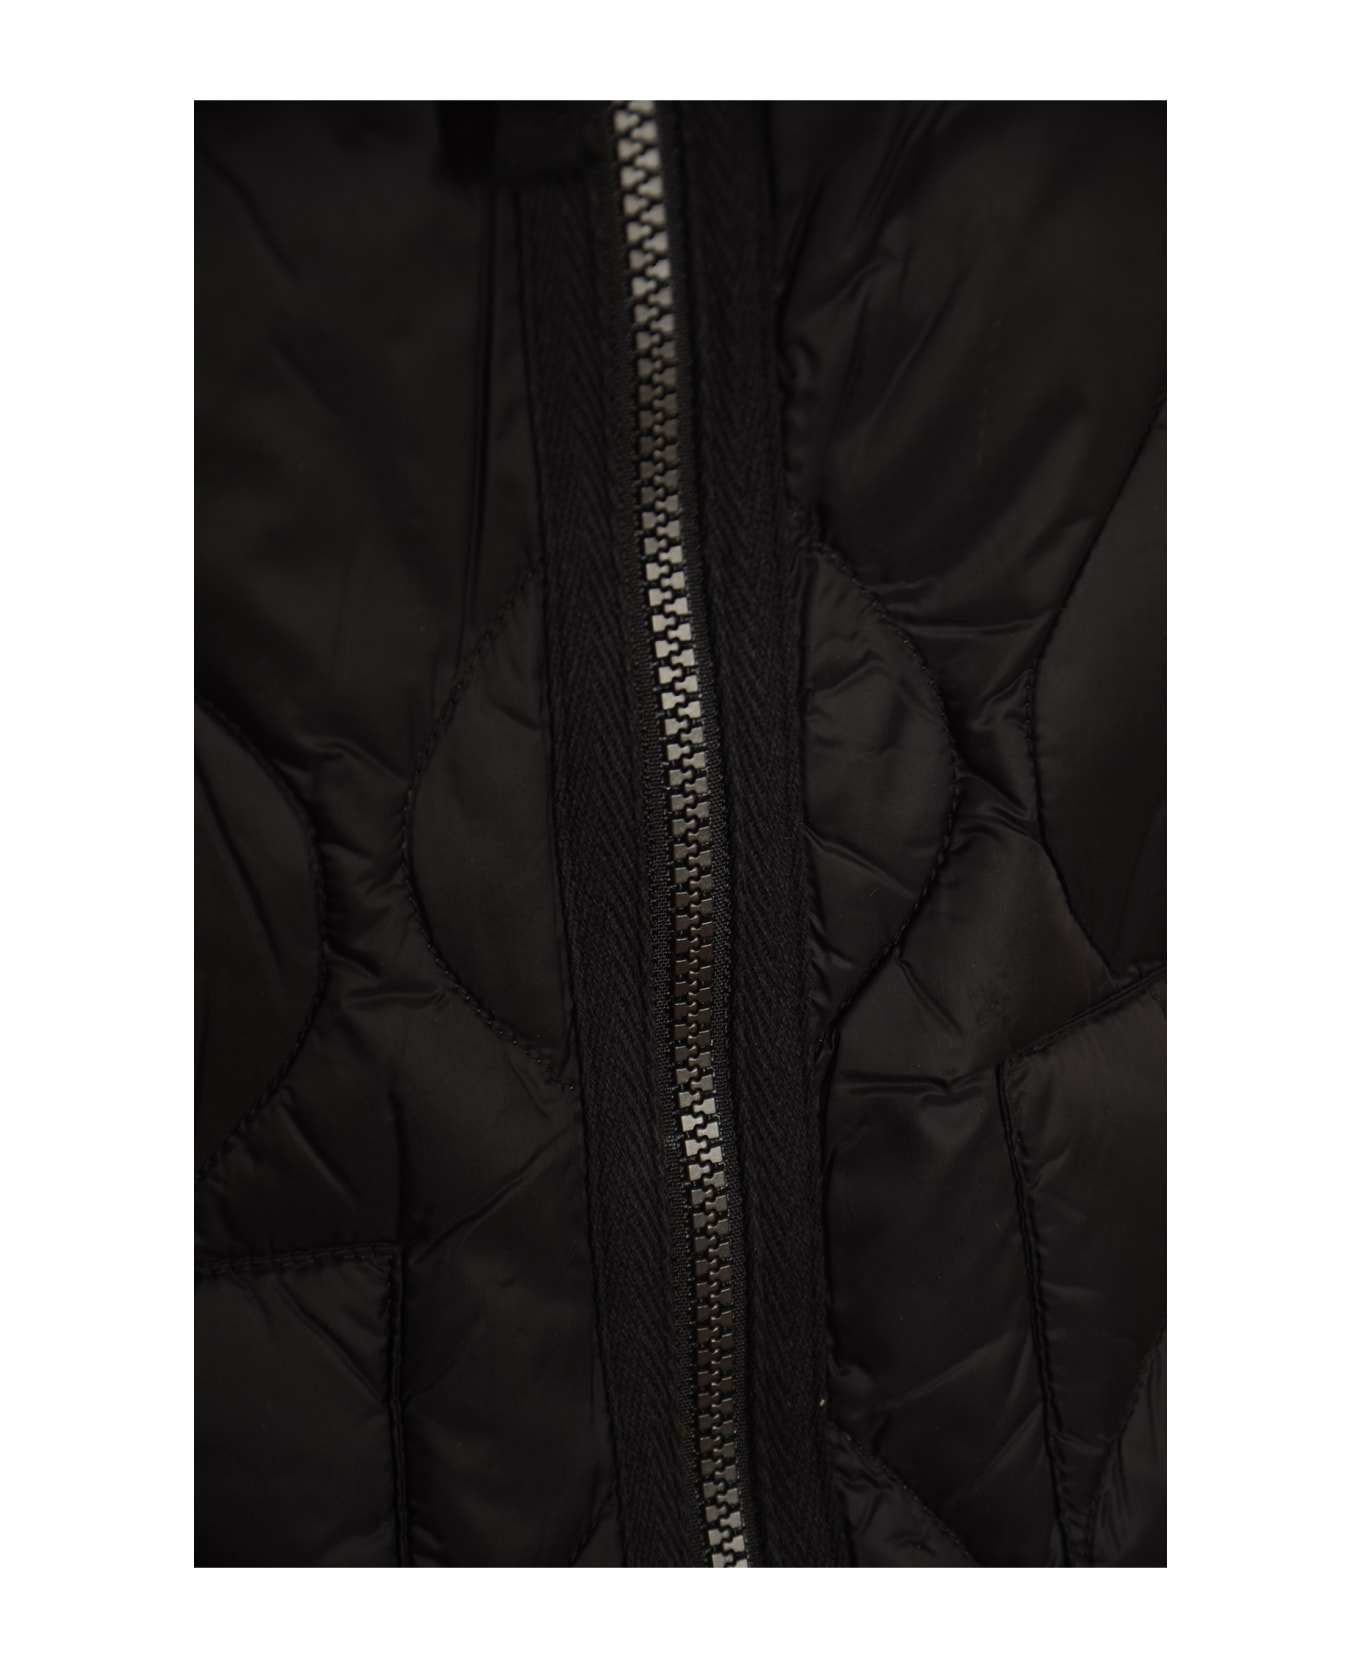 Taion Quilted Zipped Vest - Black